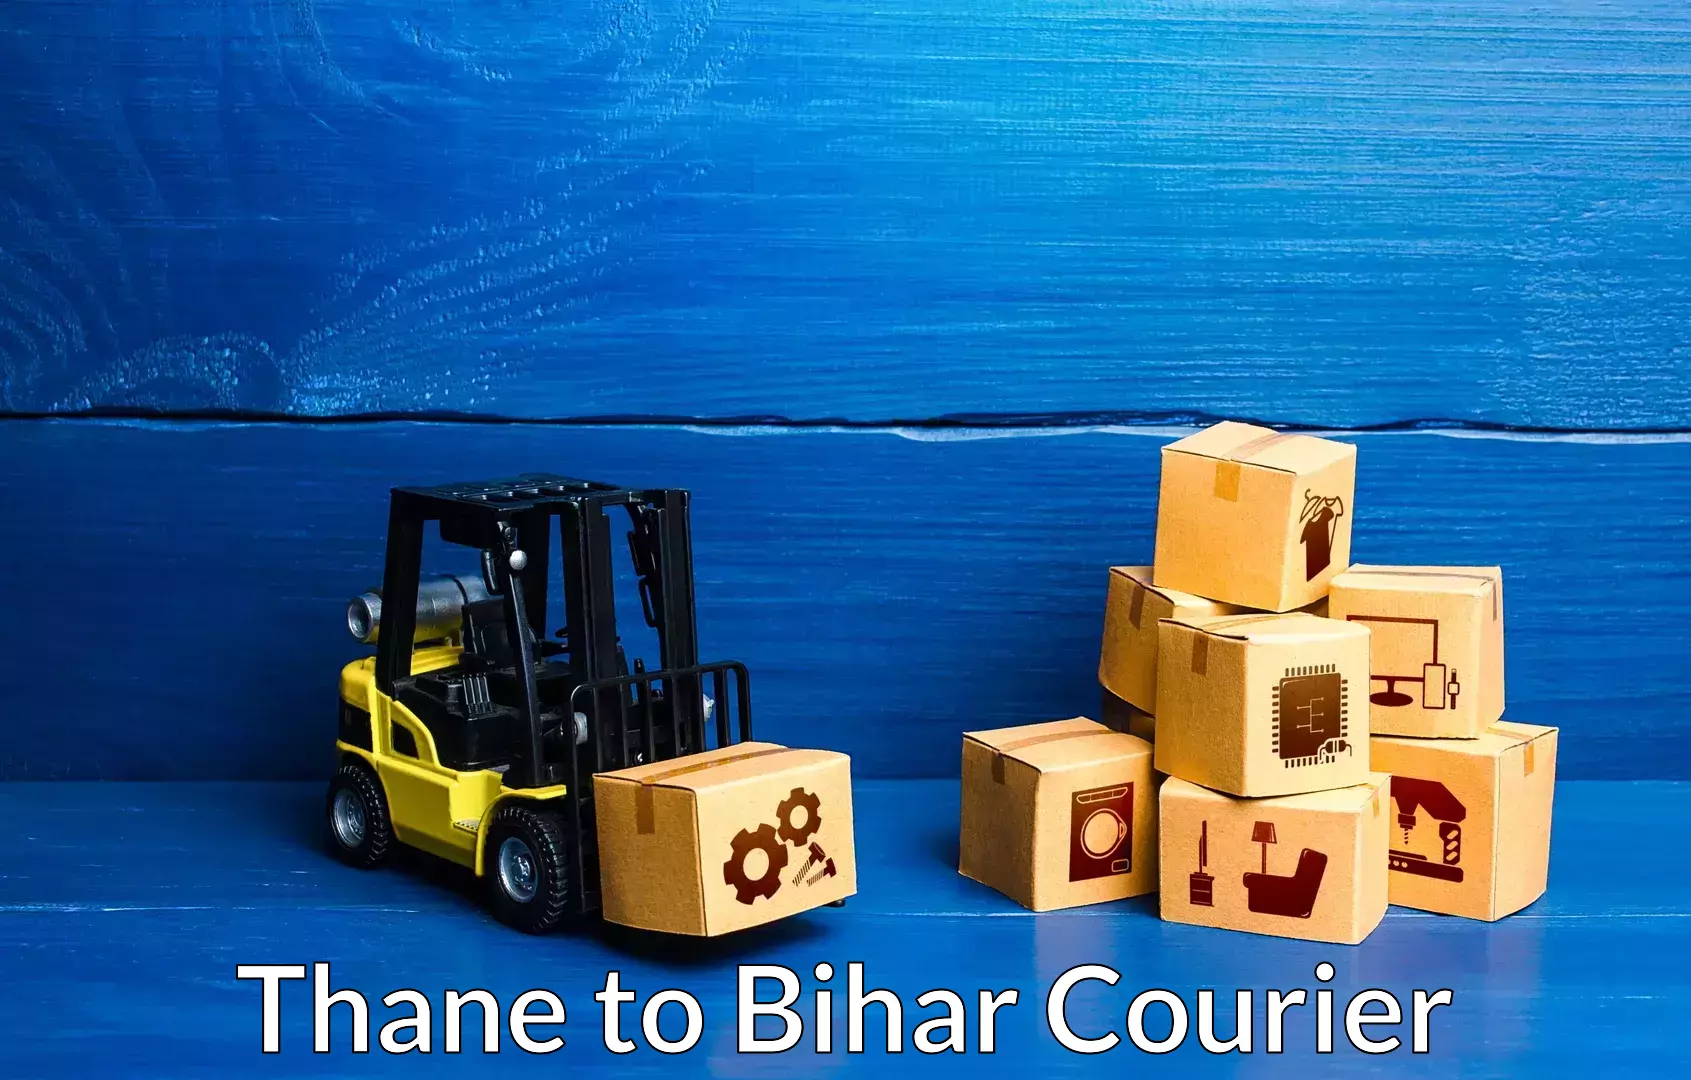 Trusted moving company Thane to Bihar